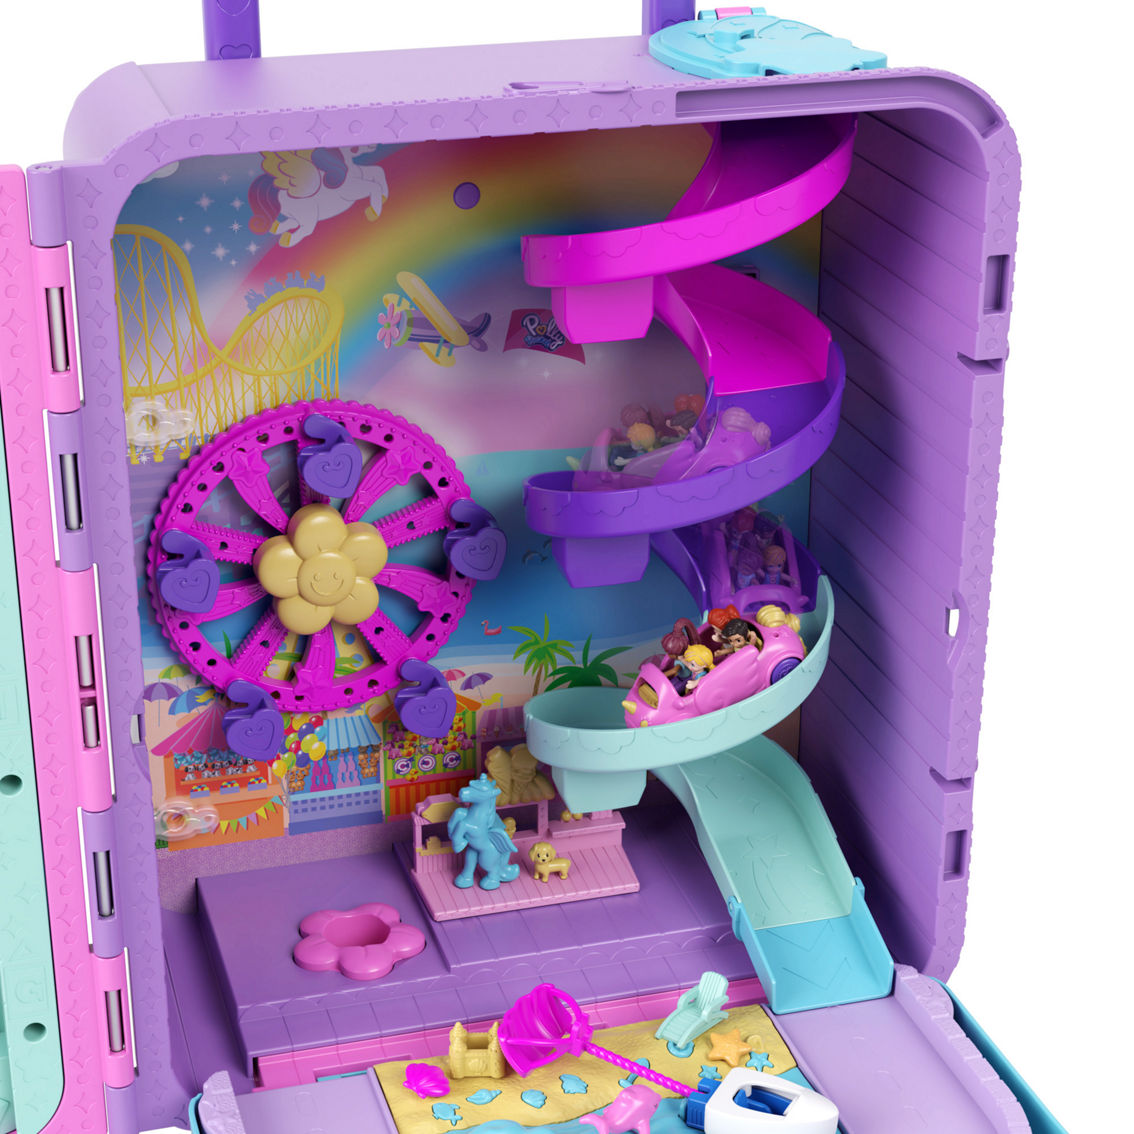 Polly Pocket Mini Flower Friends Polly with Accessories 